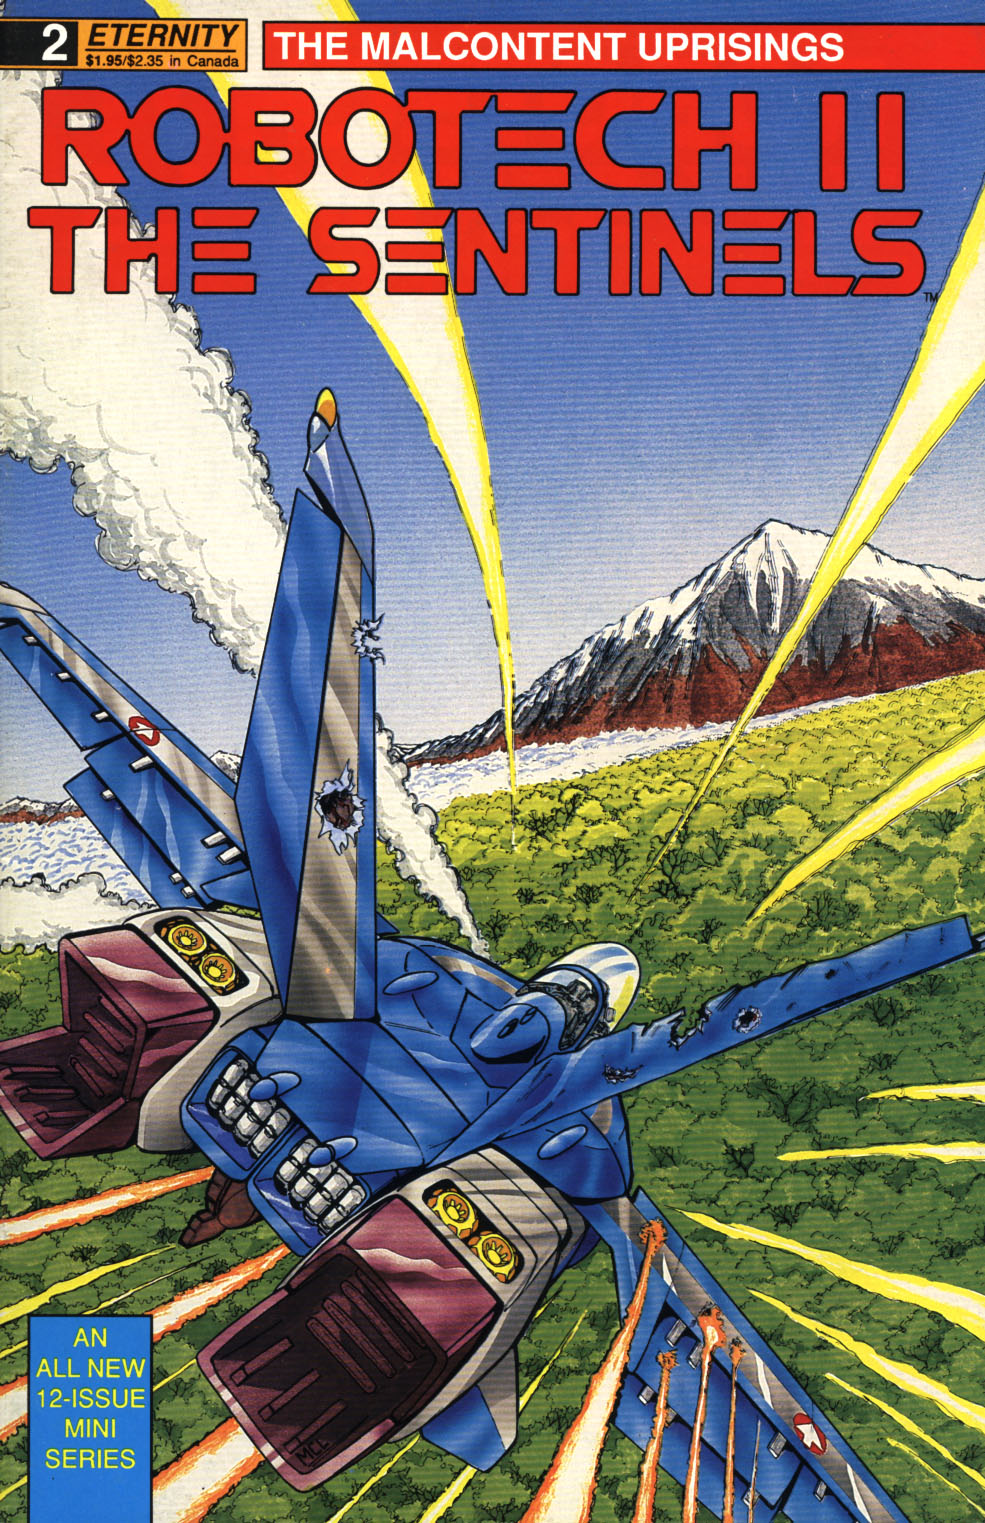 Read online Robotech II: The Sentinels - The Malcontent Uprisings comic -  Issue #2 - 1